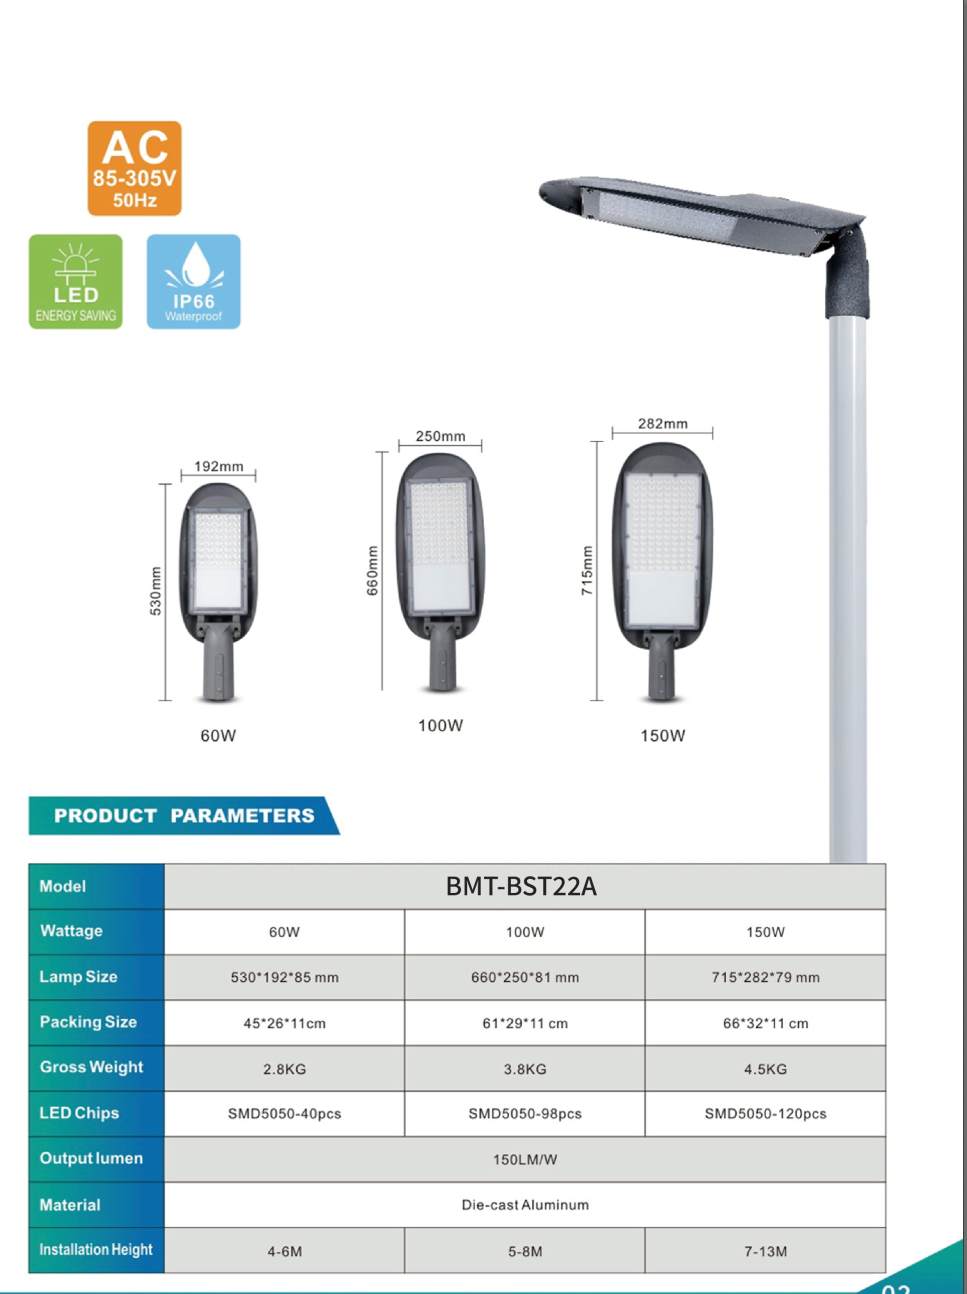 PHILIPS OEM LED Street Light BMT-BST22A Outdoor Ip65 Waterproof Aluminum Project Road Lamp 60w 120w 150w Smd Led Street Light